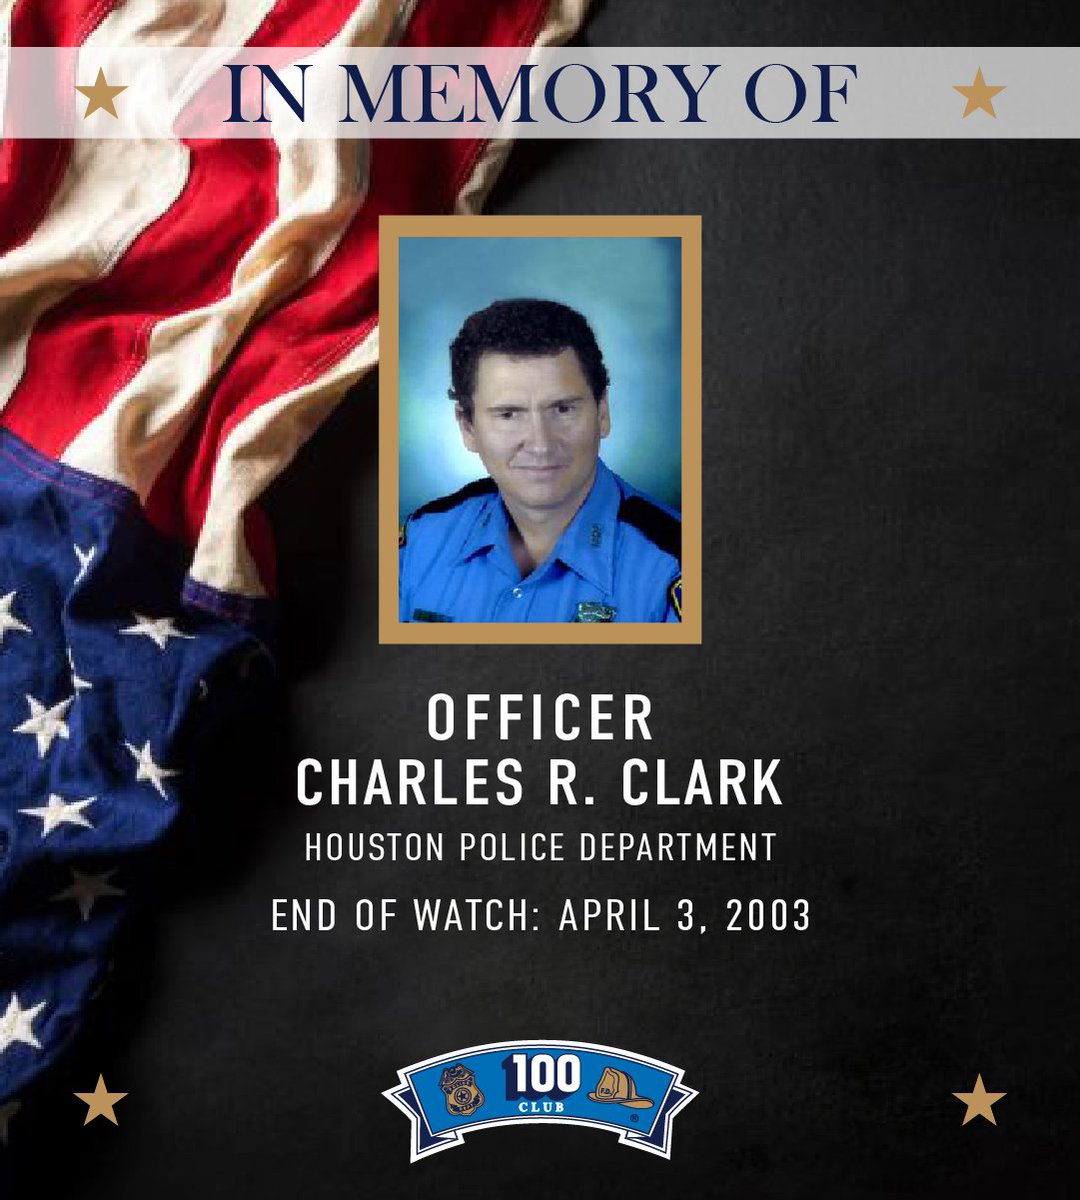 Today we remember @houstonpolice Officer Charles R. Clark who was shot and killed in the line of duty. #forthefallen #houston #HPD